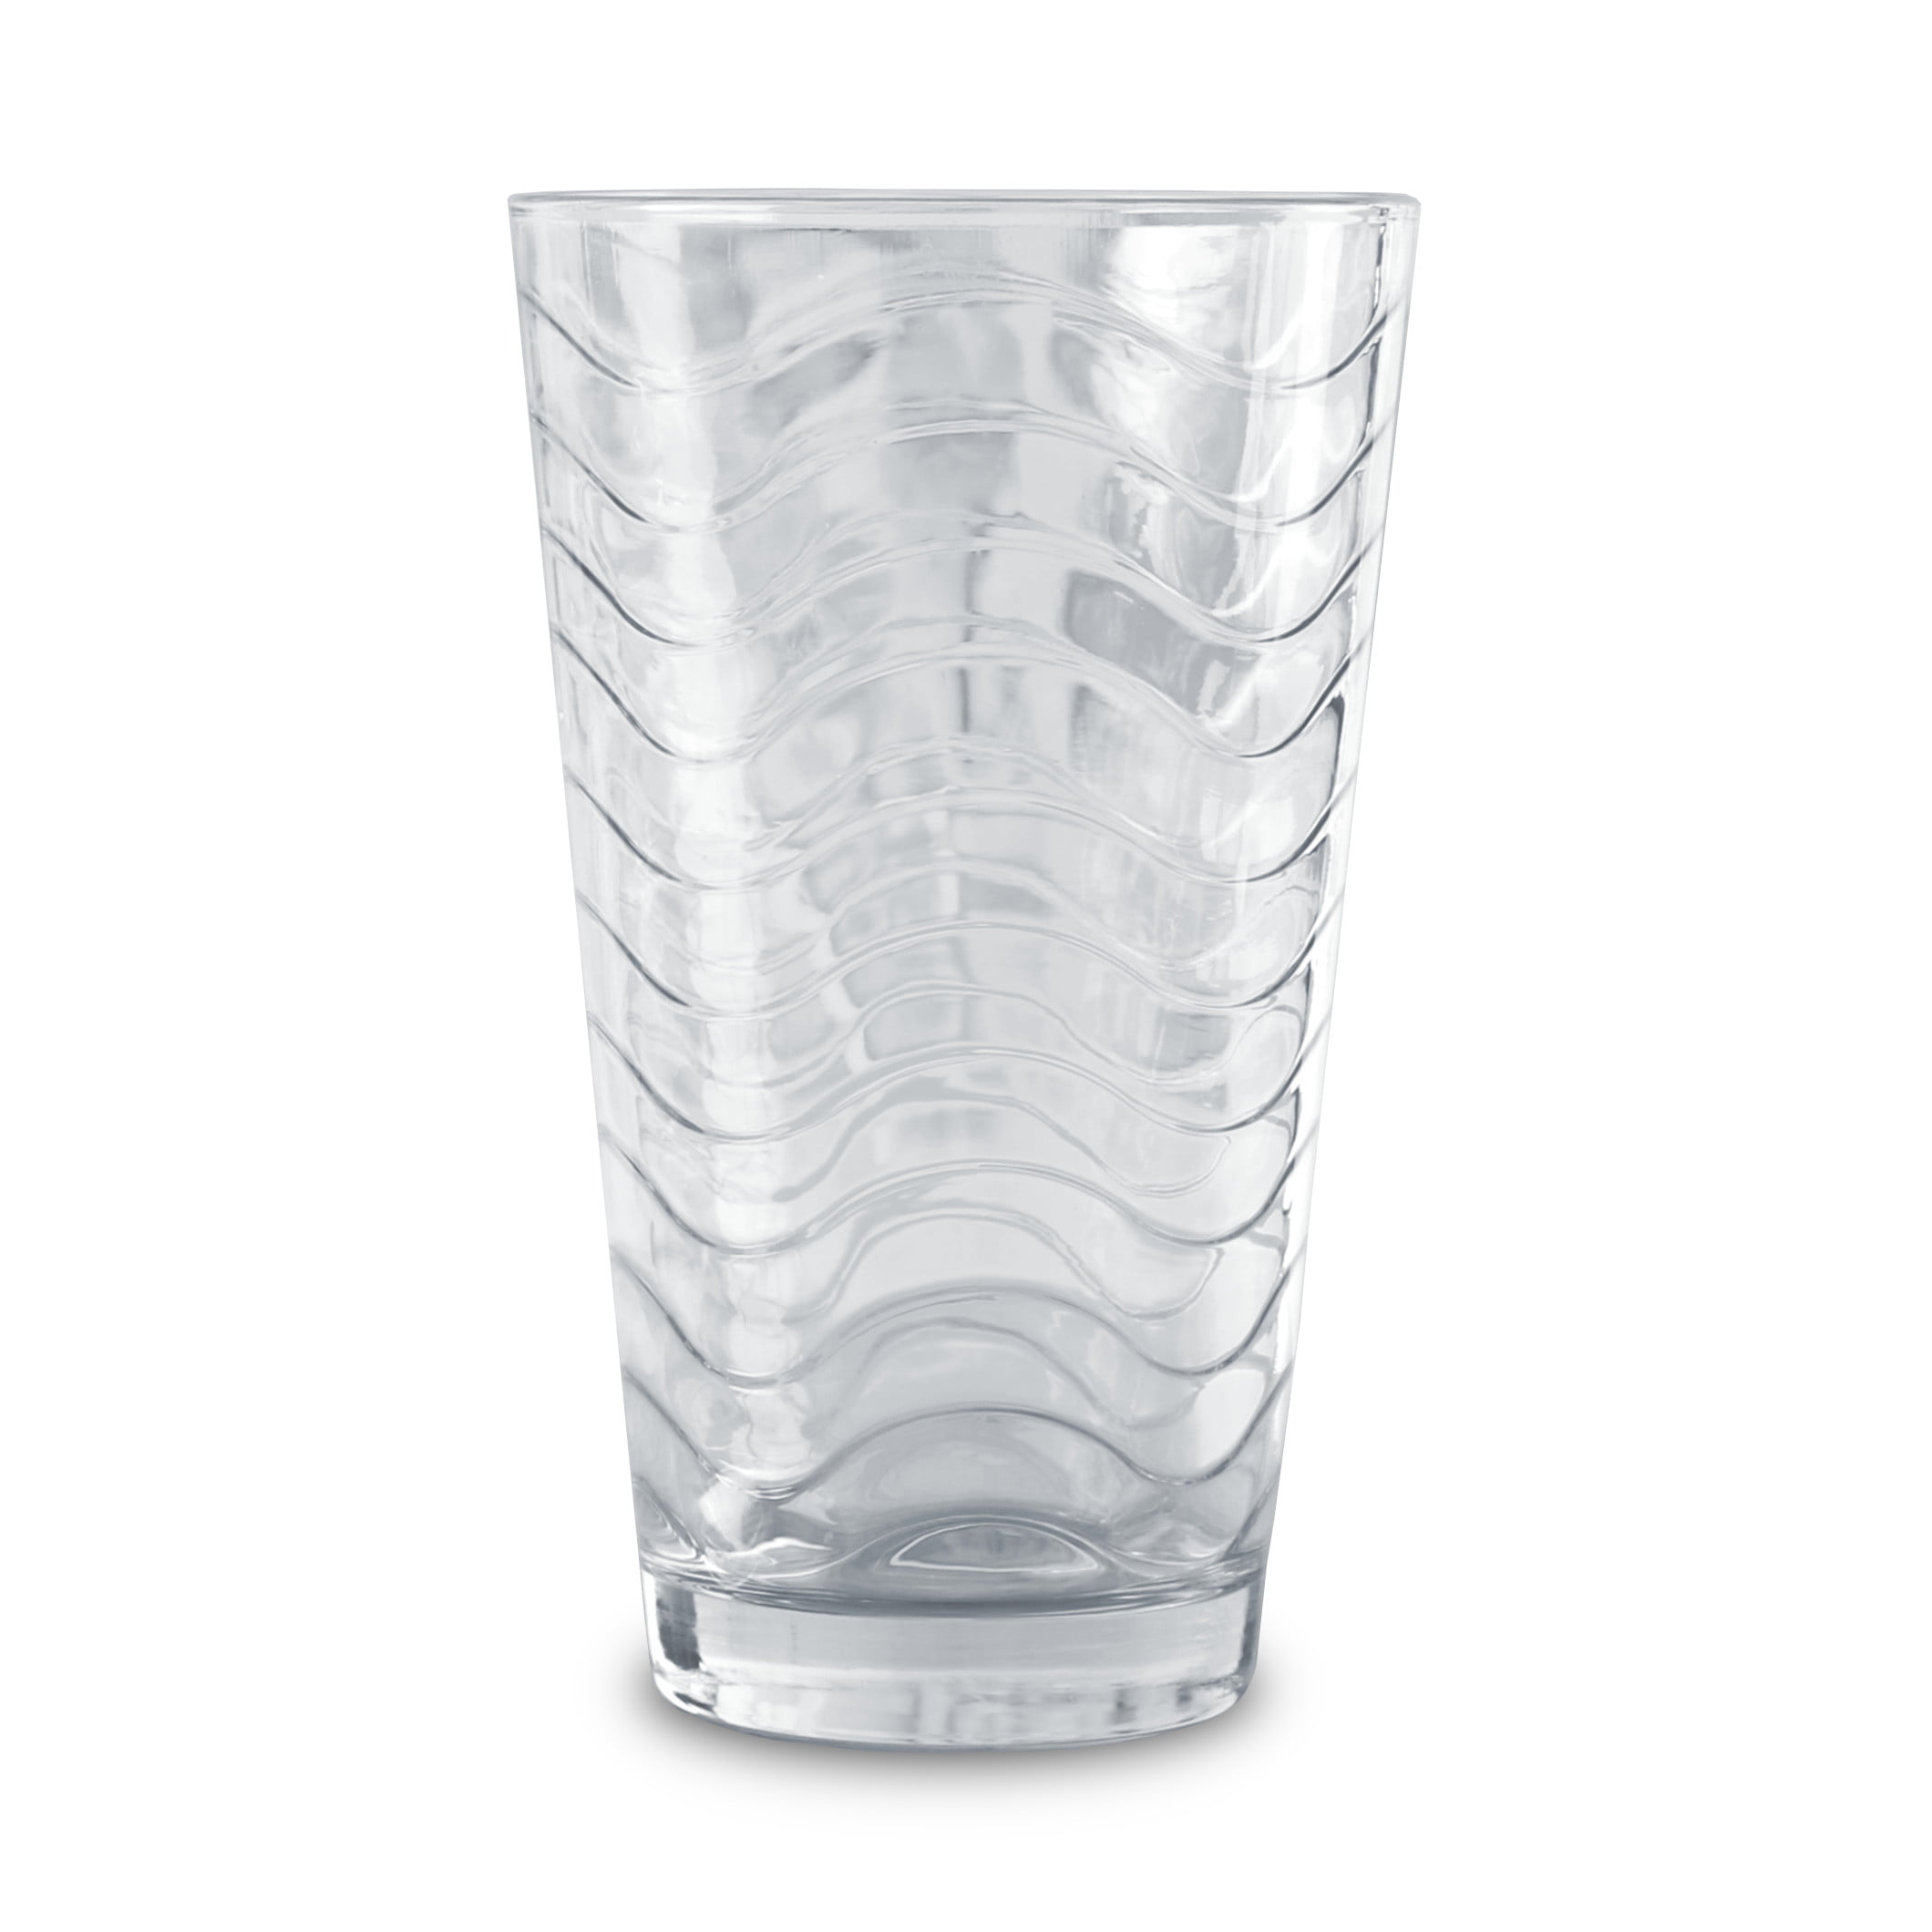 Circleware 40135-AM 15.75 oz Pulse Cooler Glassware, Clear - Set of 8